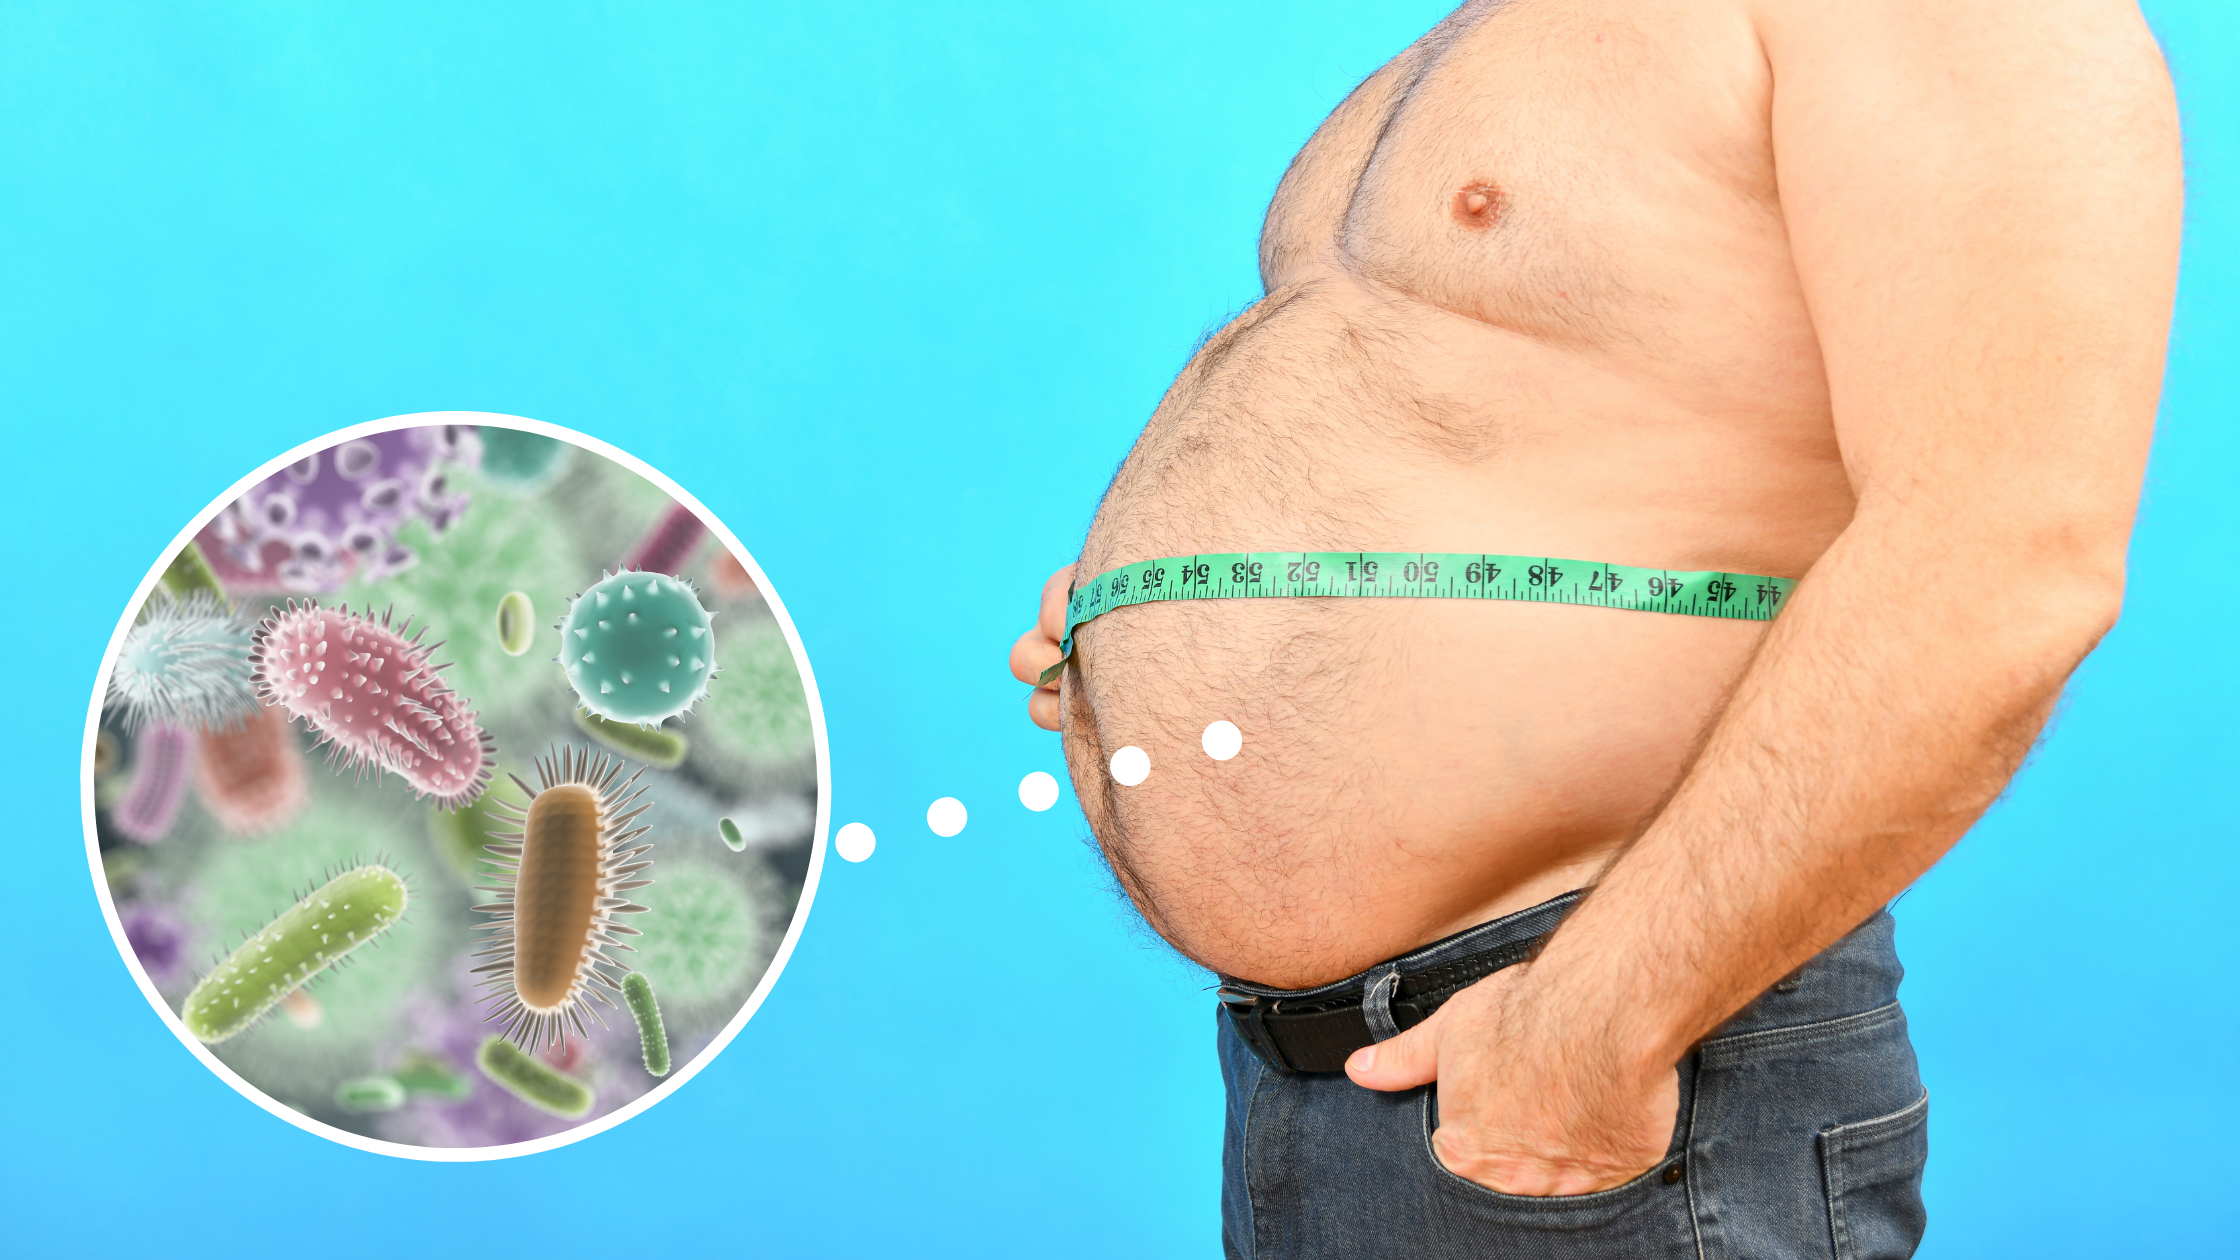 Gut microbiome, obesity, microbiome, gut health, weight loss, nutrition